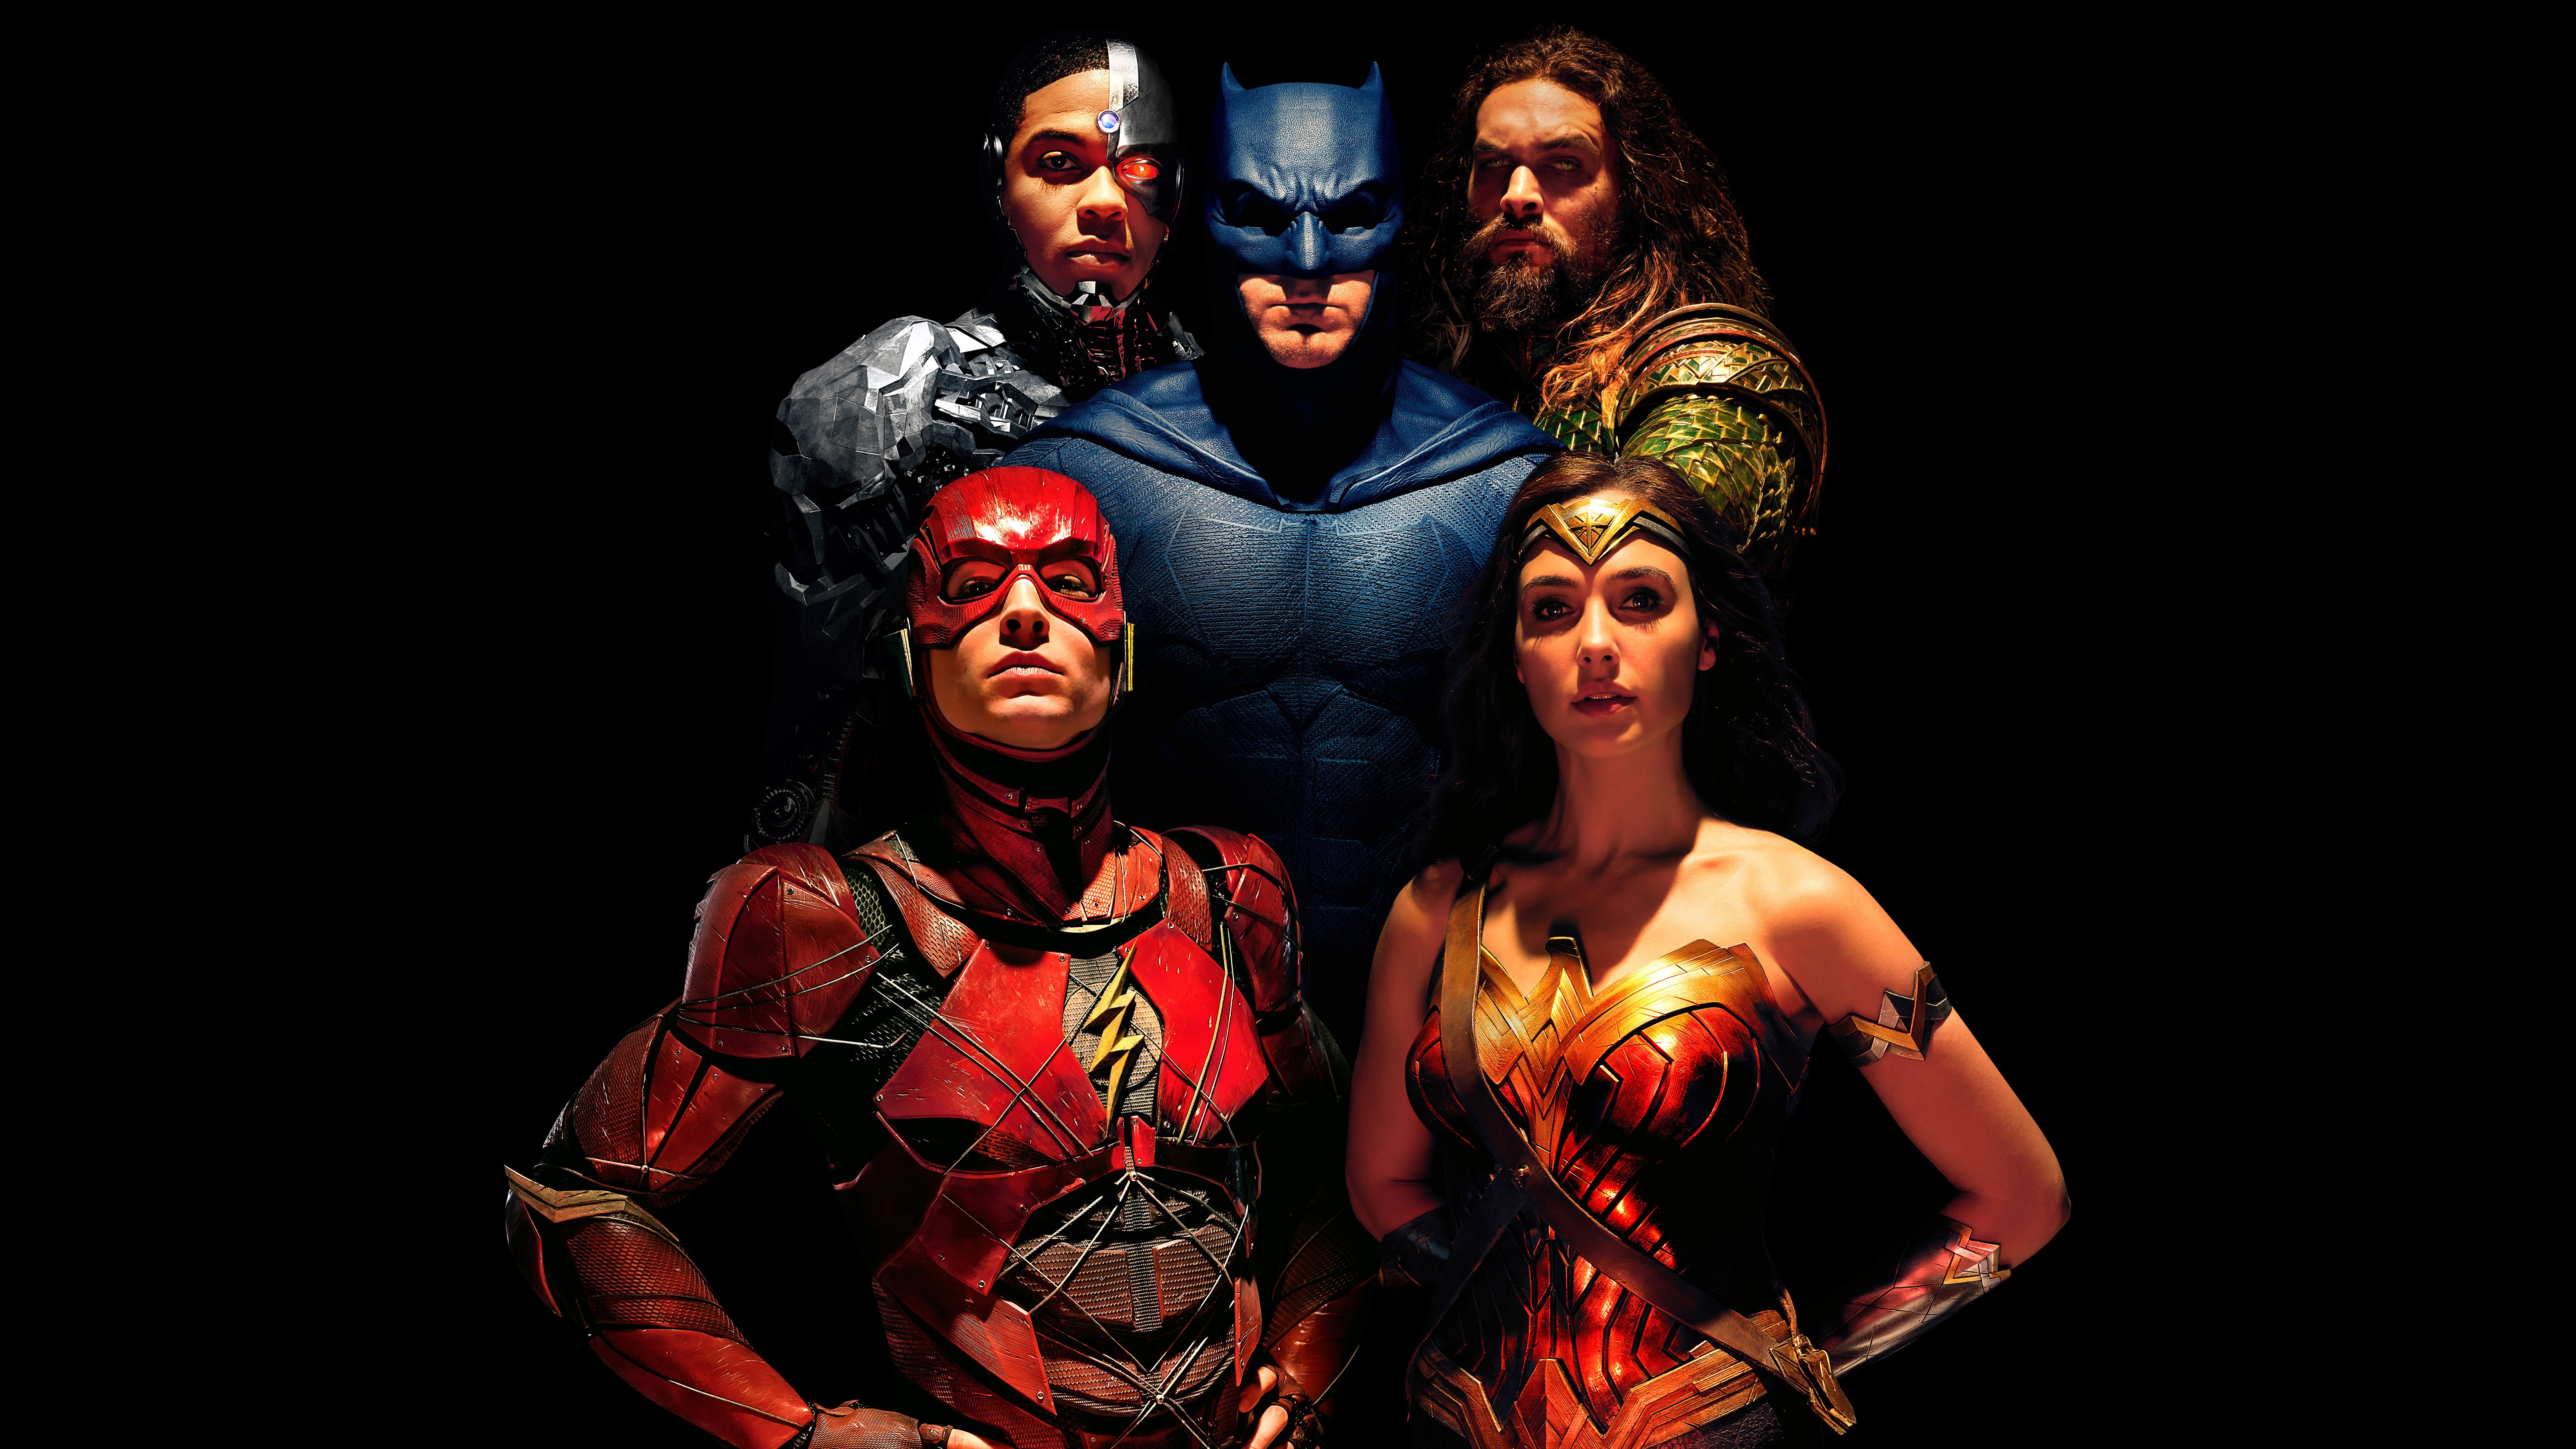 7680x4320 Justice League 8k Hd Movies 4k Wallpaper Image Background Photo And Picture